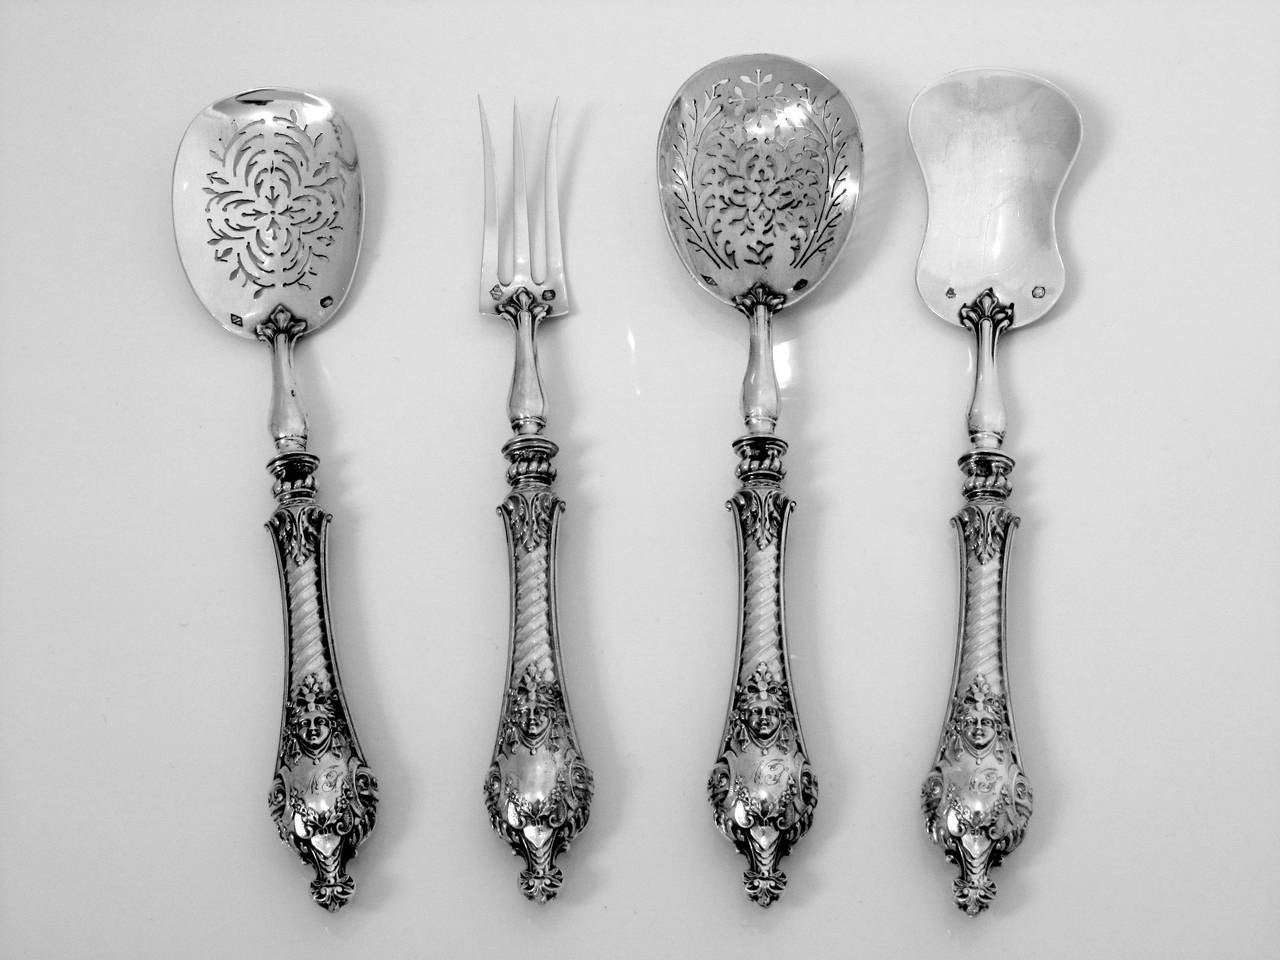 Renaissance Gorgeous French All Sterling Silver Dessert Hors d'Oeuvre Set 4 pc Mascarons